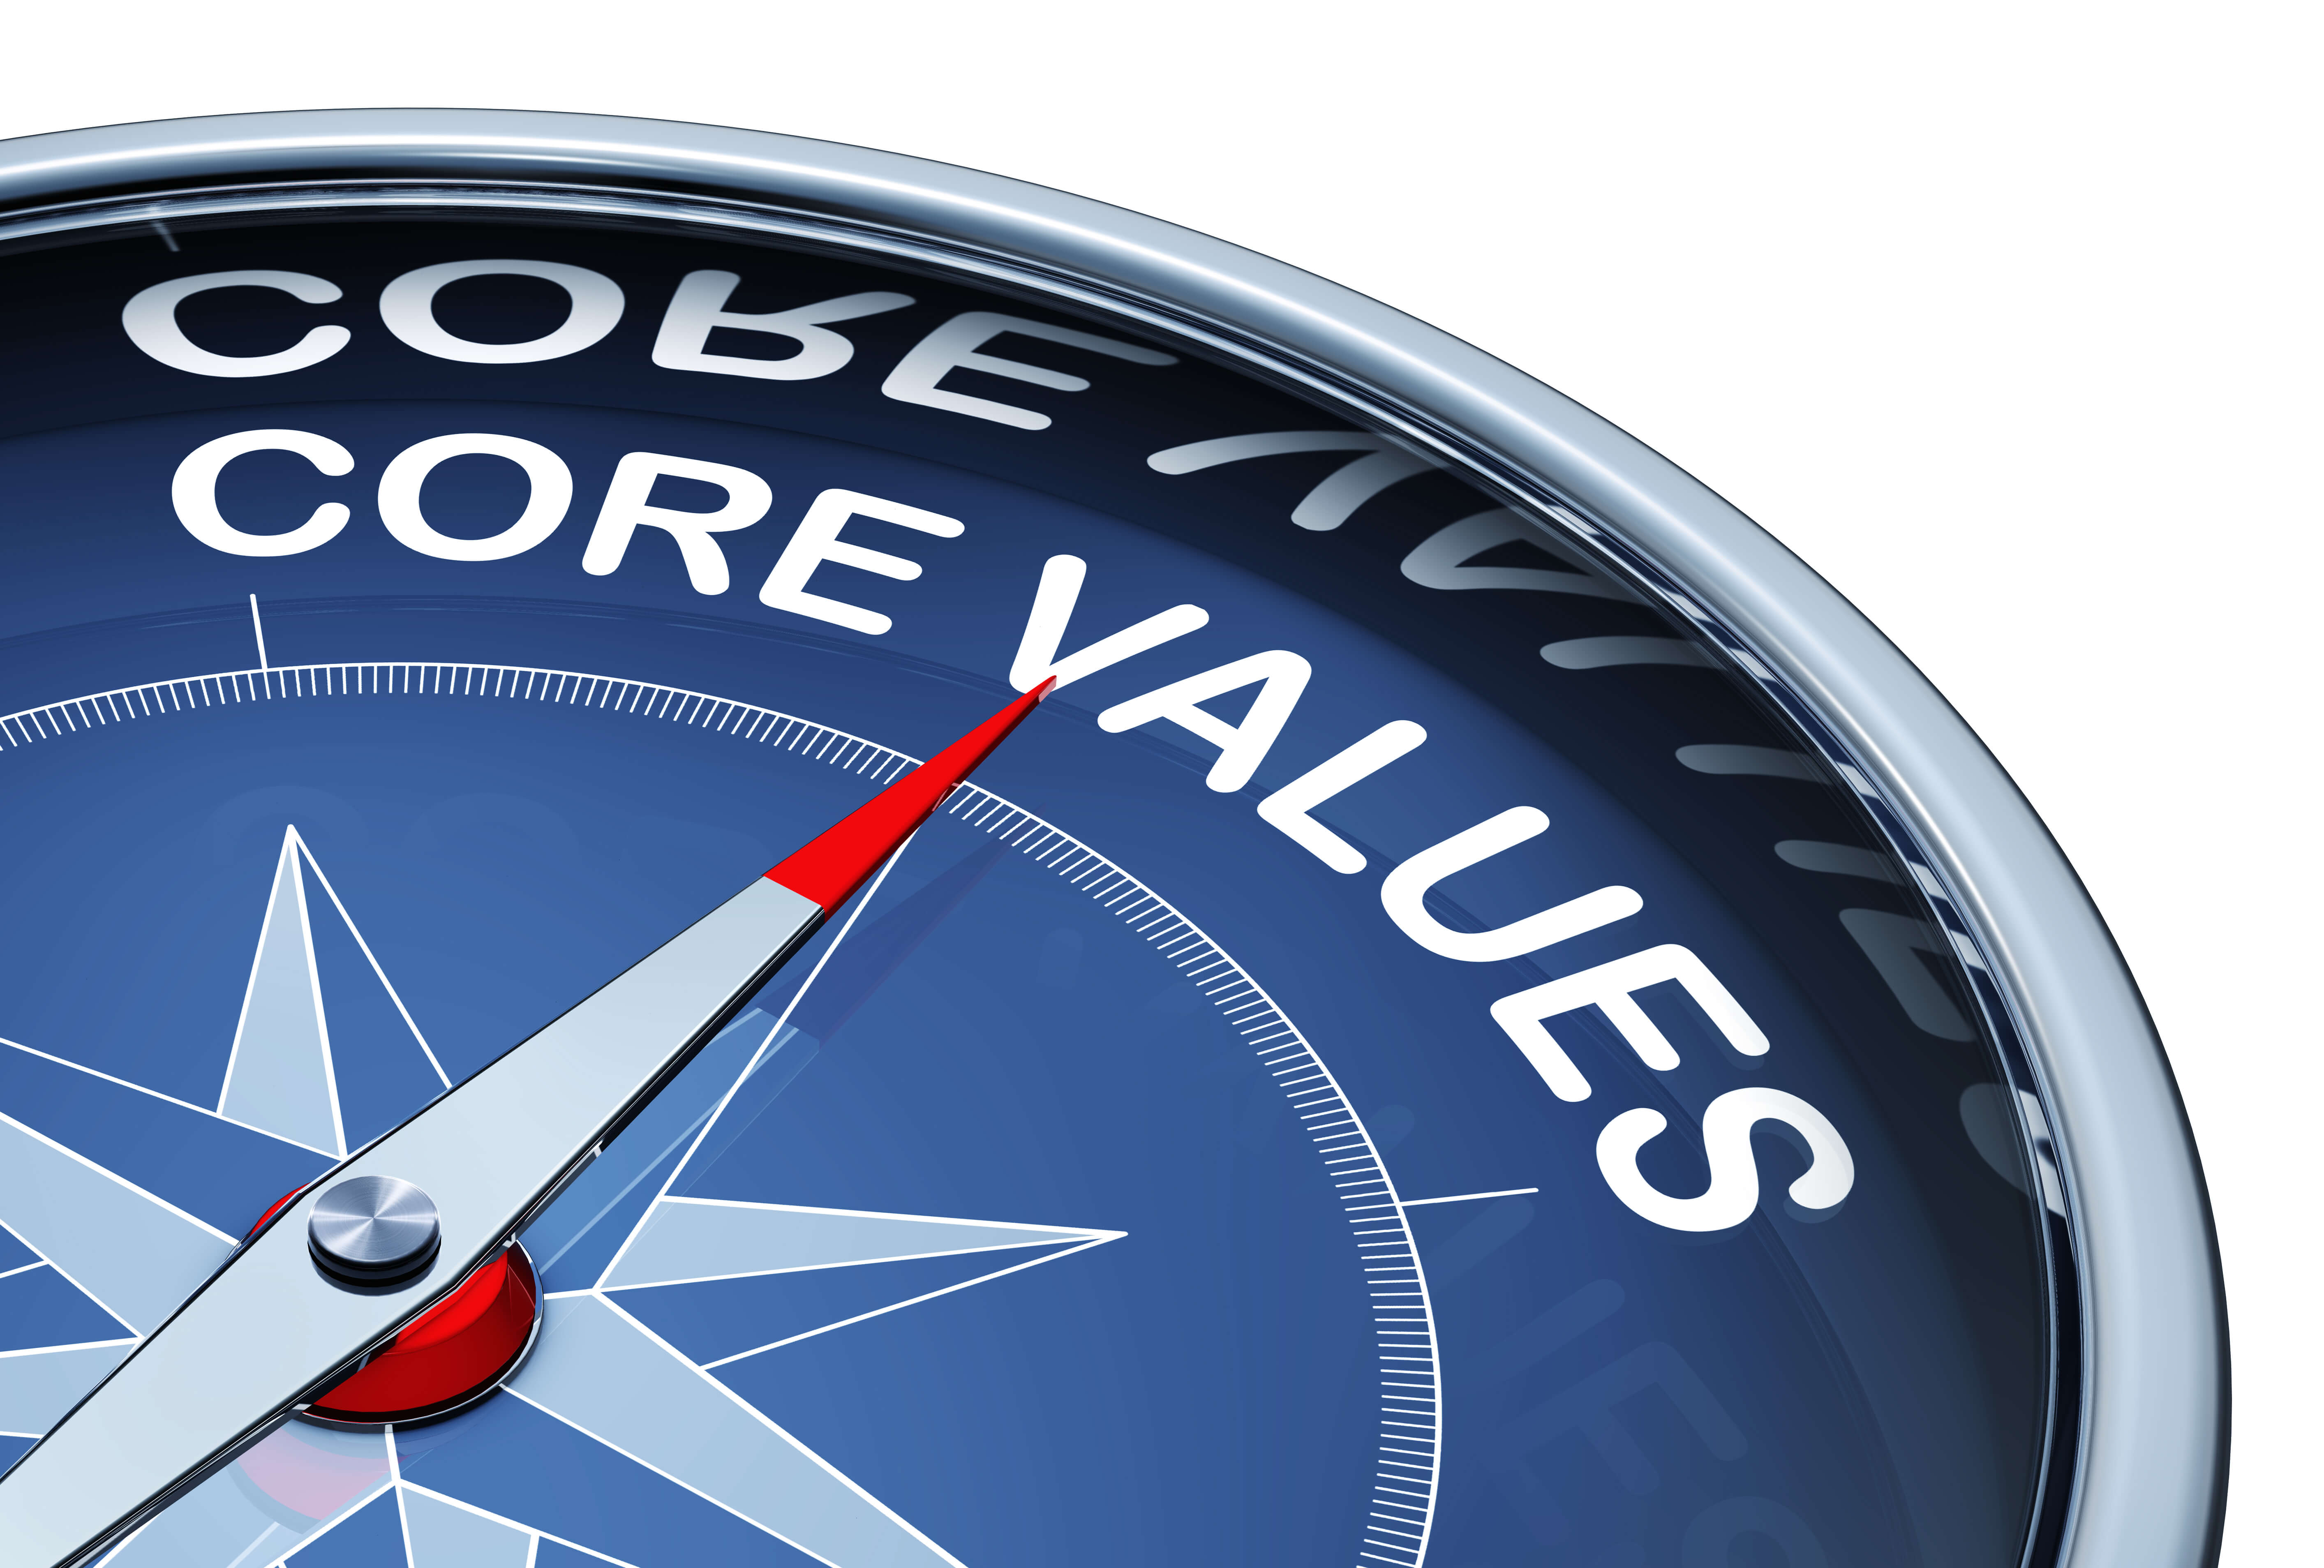 Core values on a compass